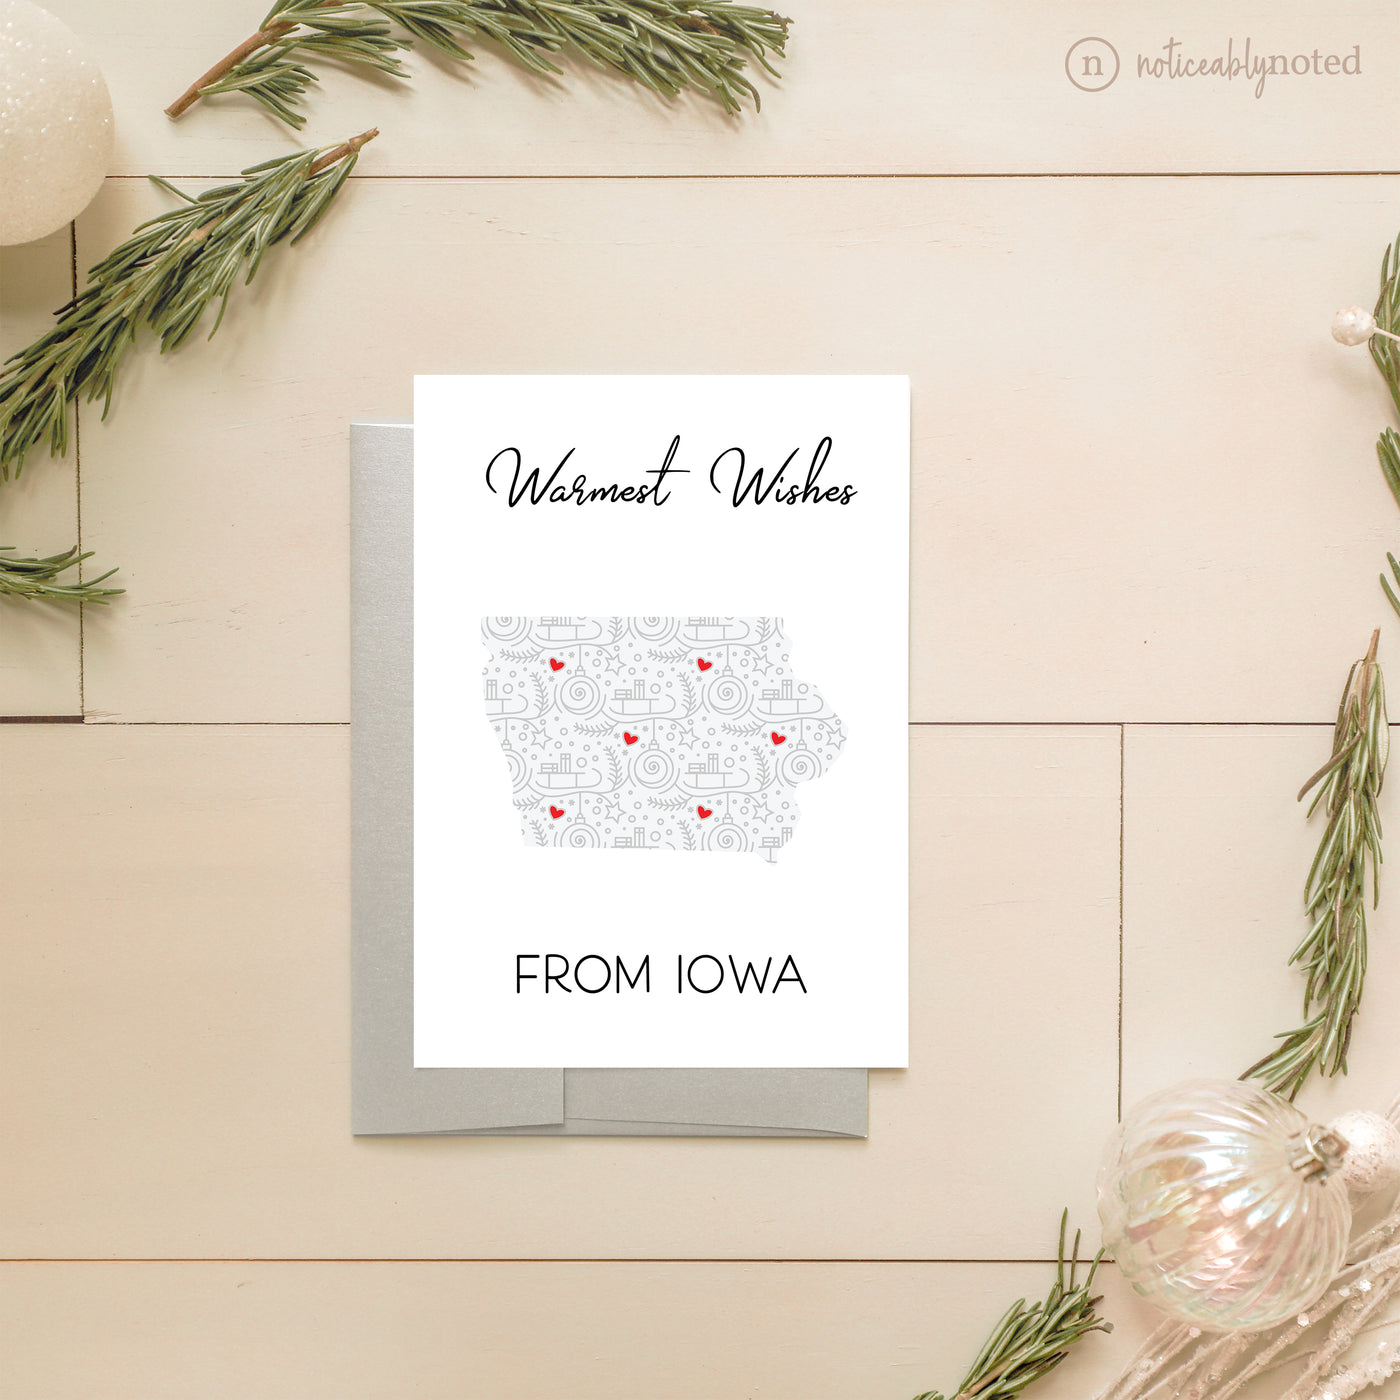 IA Holiday Greeting Cards | Noticeably Noted